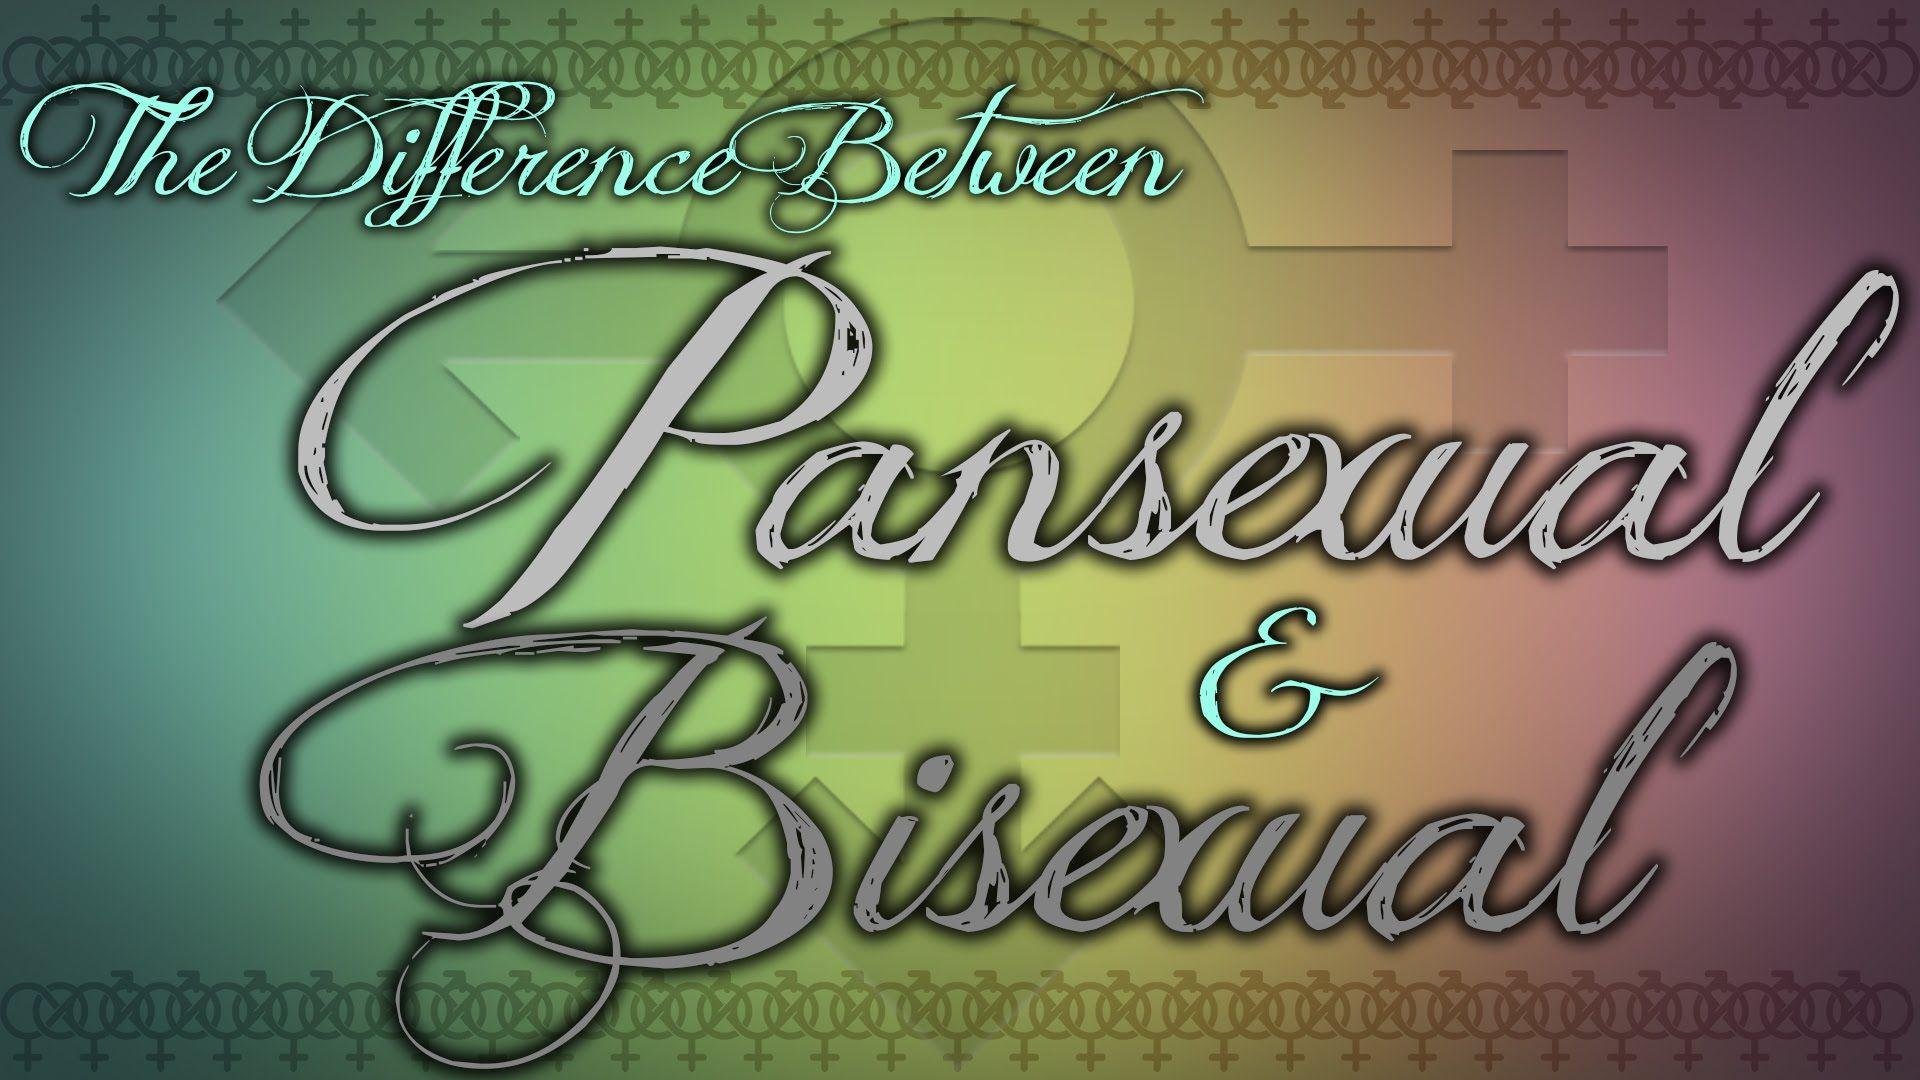 The Difference Between Bisexual and Pansexual